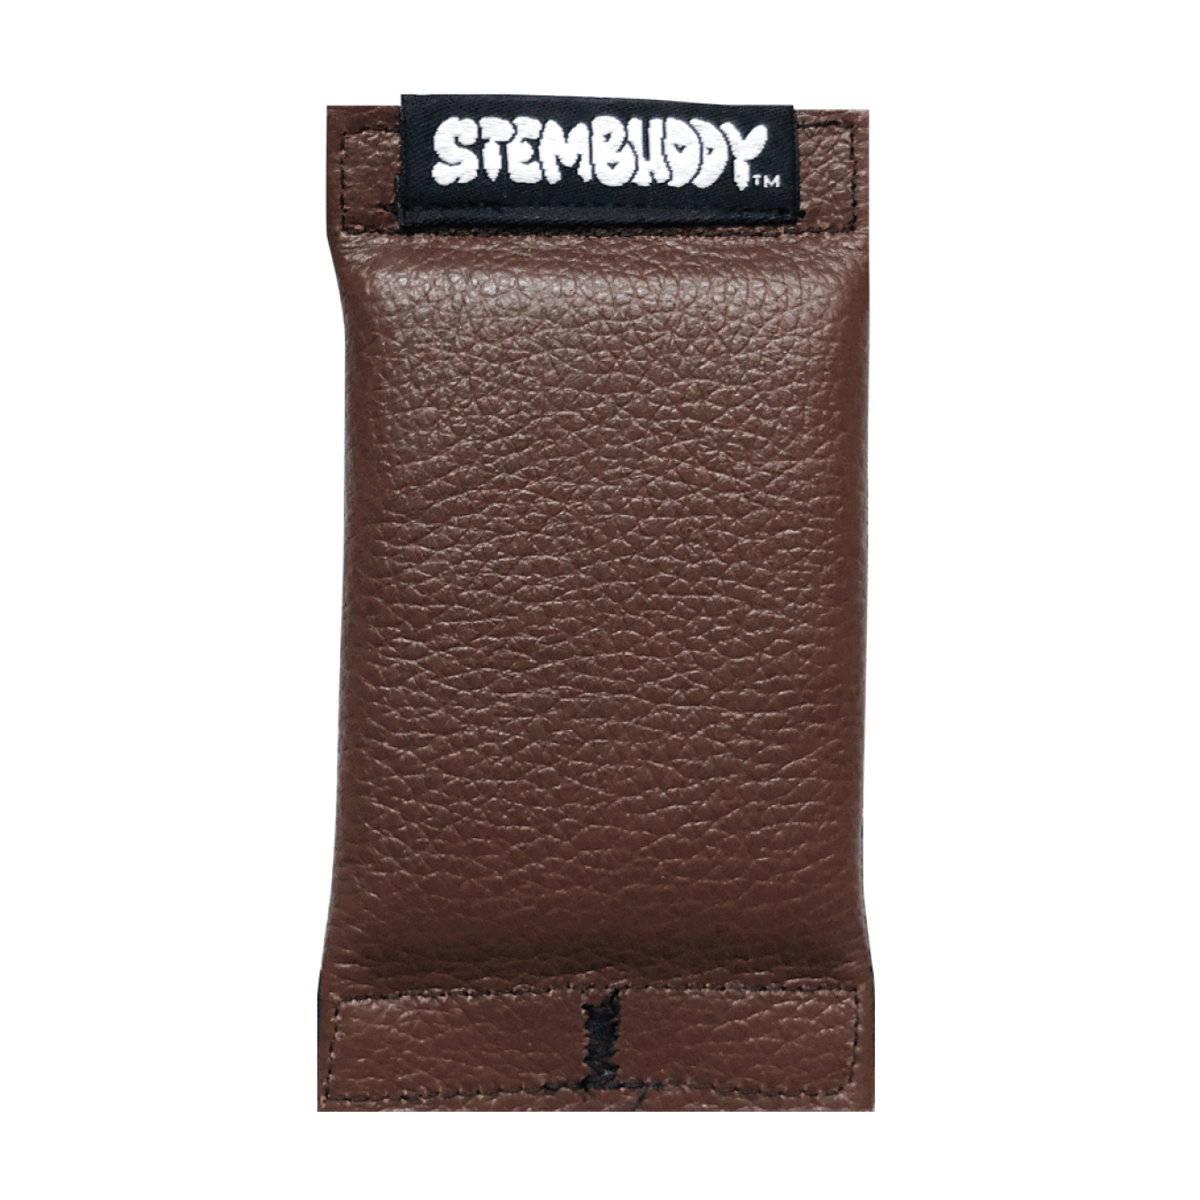 Image of Brown LEATHER STEMBUDDY™